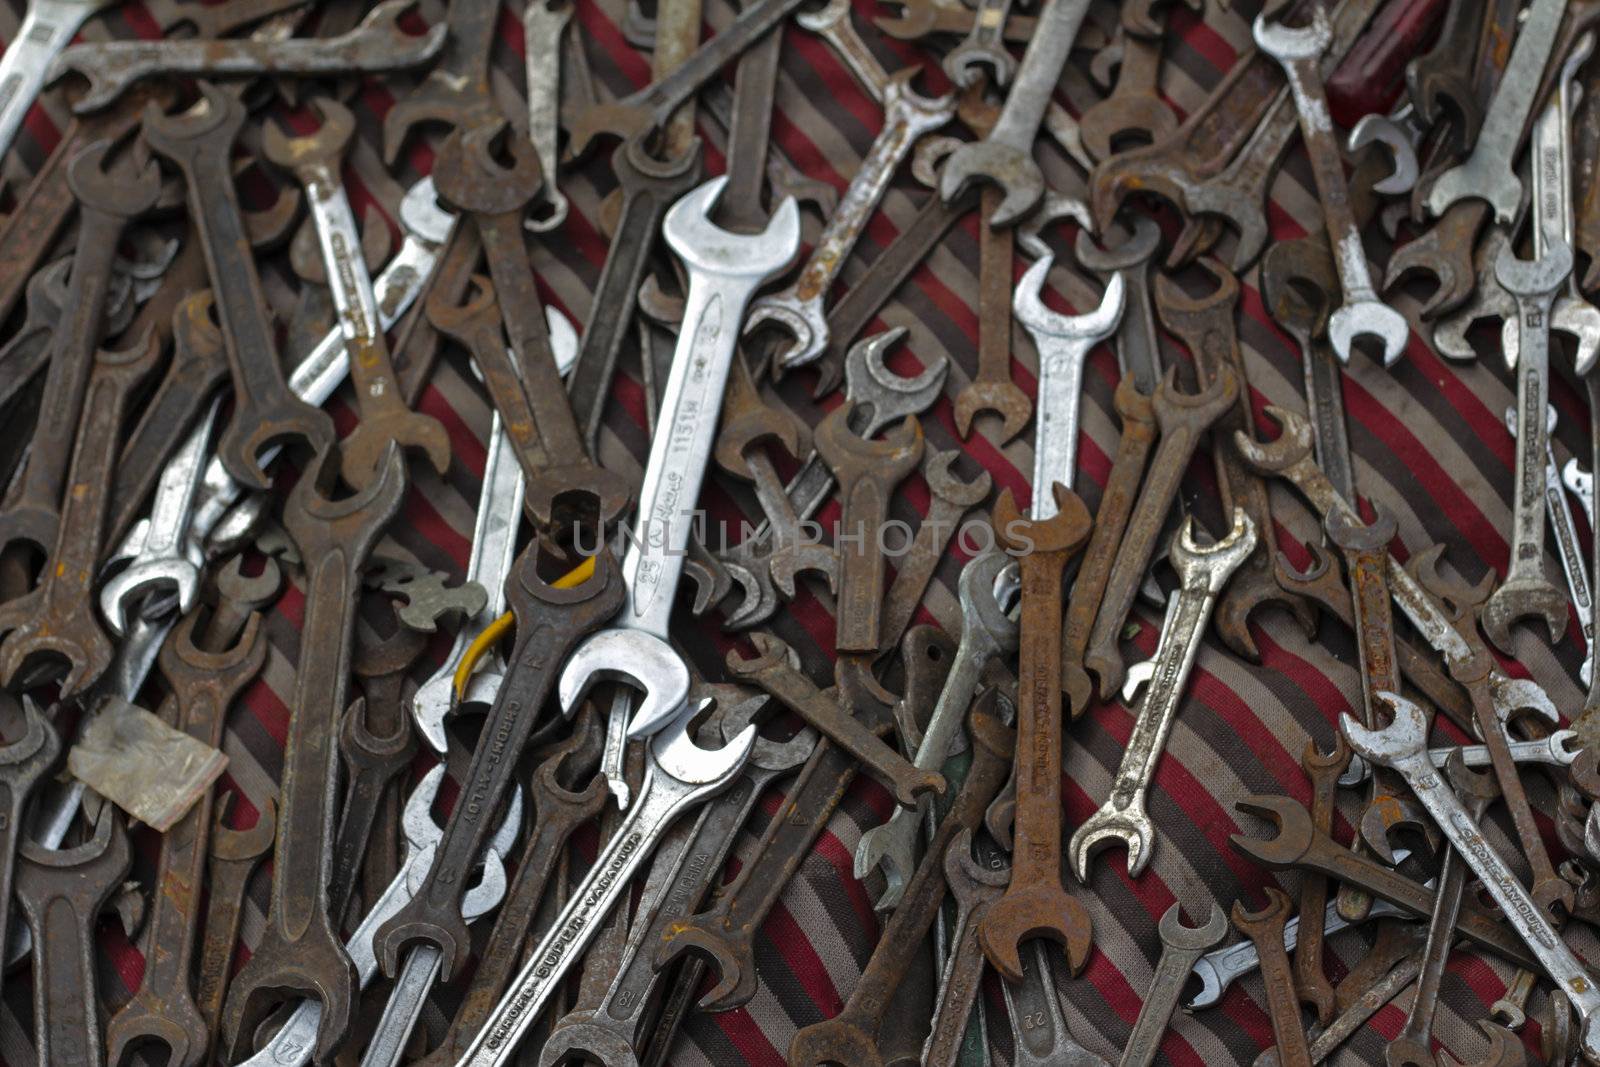 A large collection of small old wrenches







a collection of many many old keys